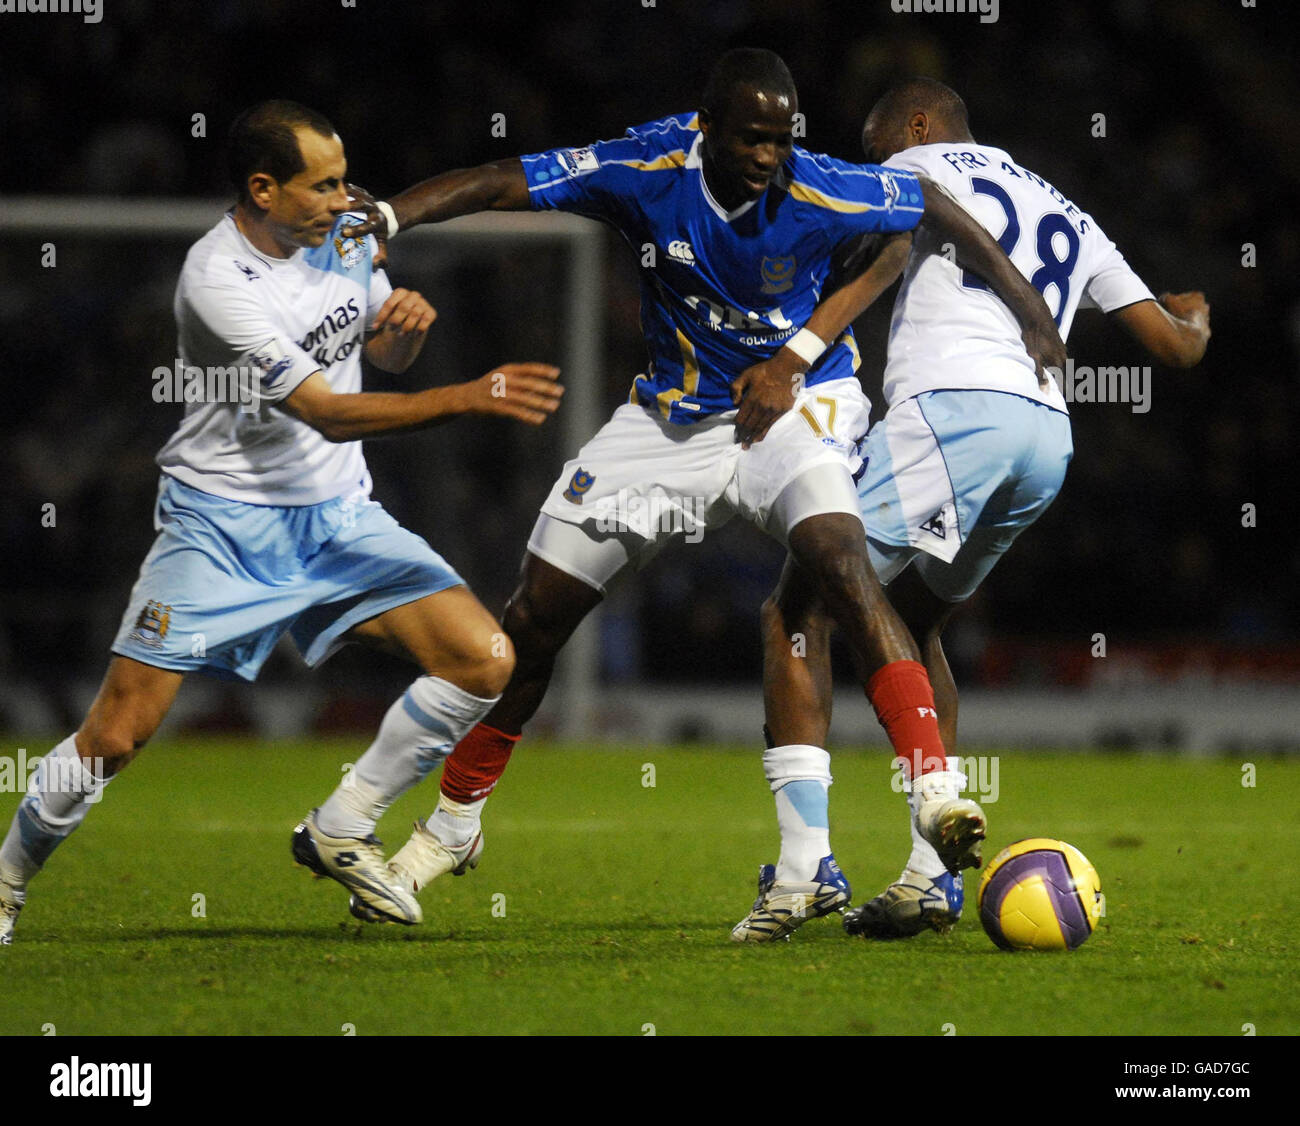 Manchester City's Martin Petrov (left) and Gelson Fernandes tackle Portsmouth's John Utaka (centre) during the Barclays Premier League match at Fratton Park, Portsmouth. Stock Photo